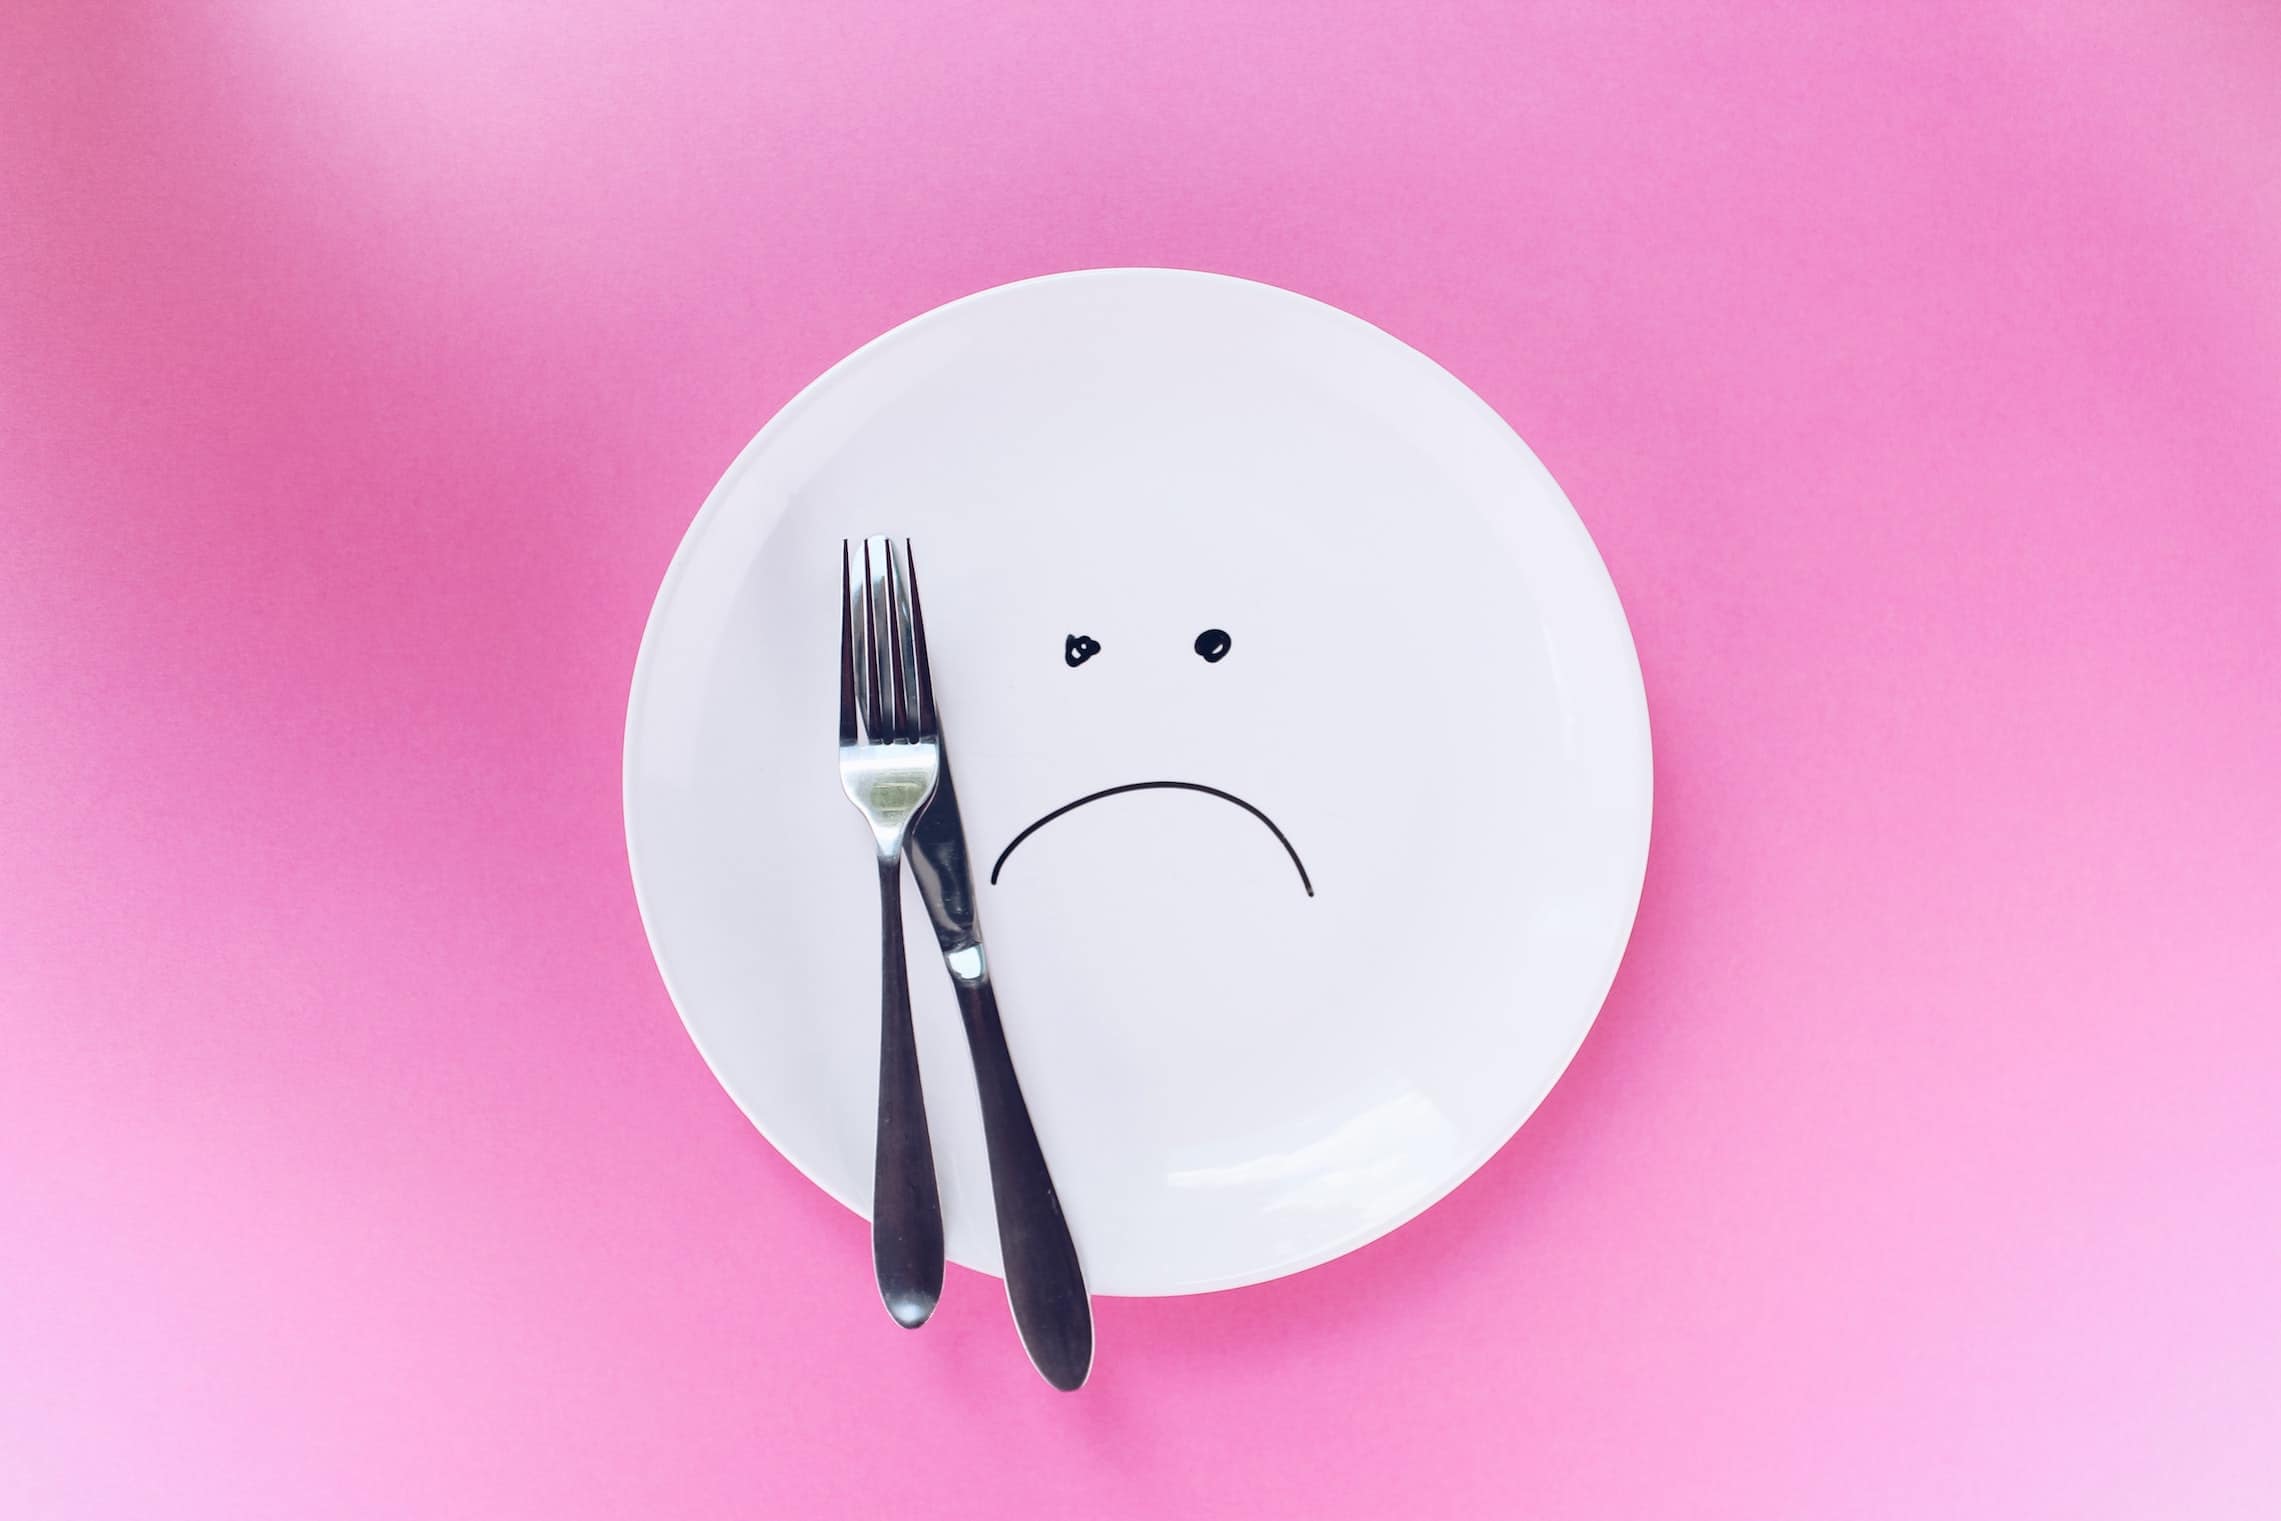 Negative Impacts of Anorexia Nervosa